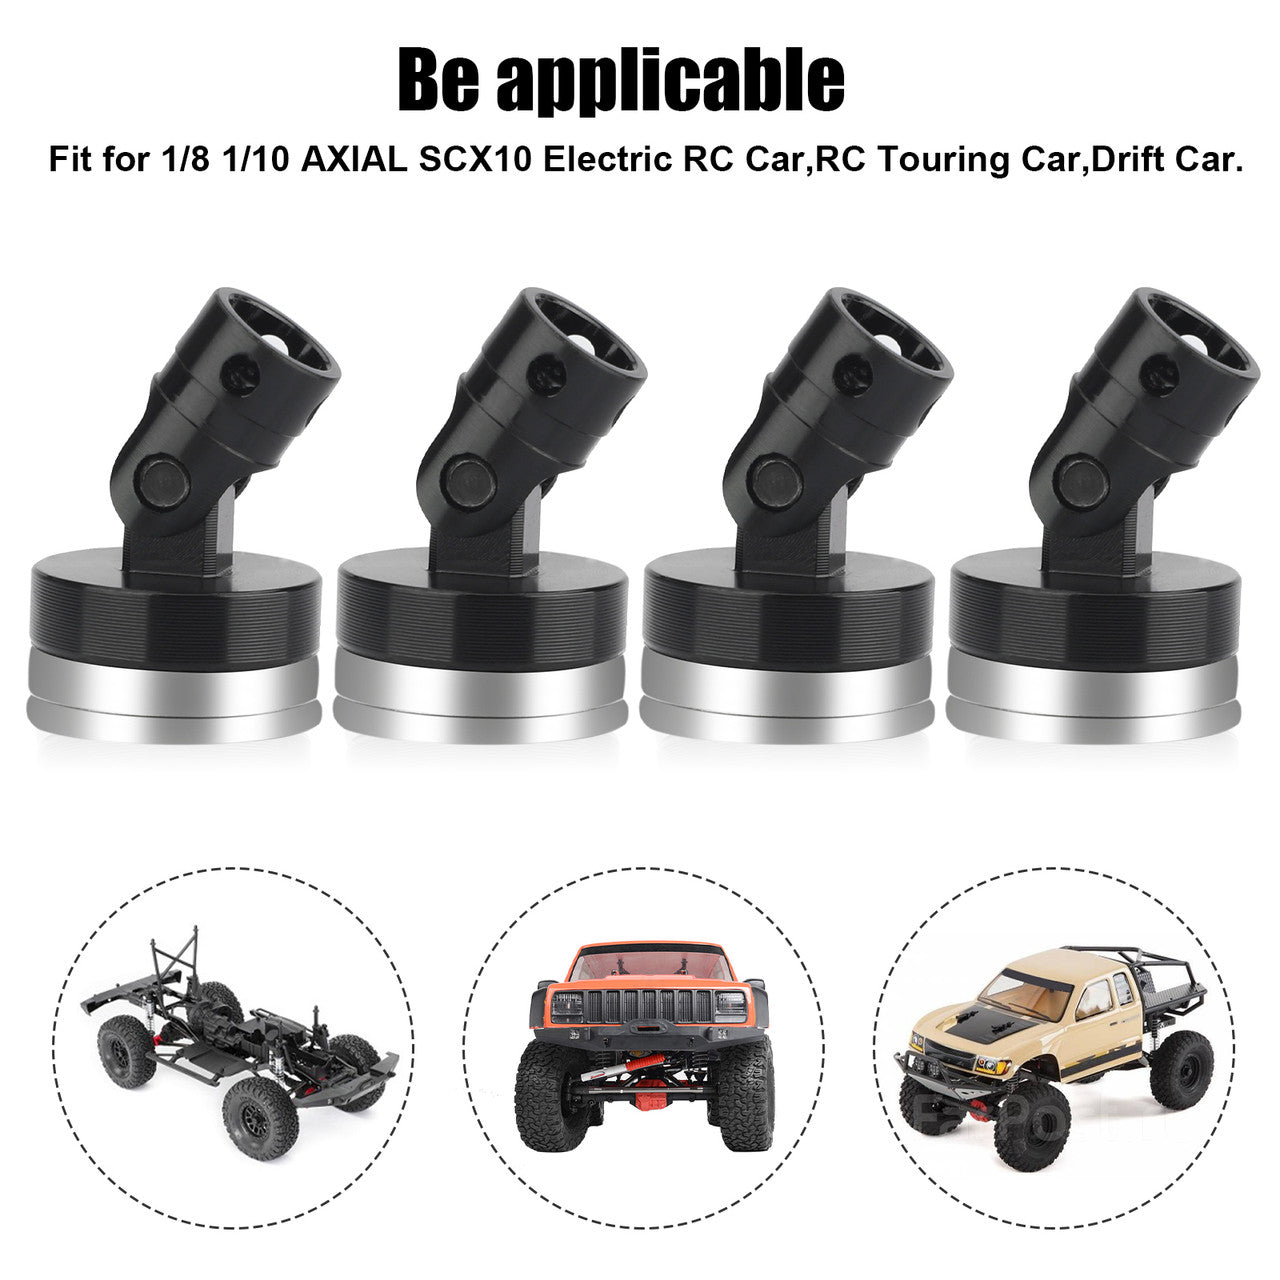 Magnetic Stealth Invisible Body Post for 1/8 1/10 AXIAL SCX10 Electric RC Car , 4 pcs